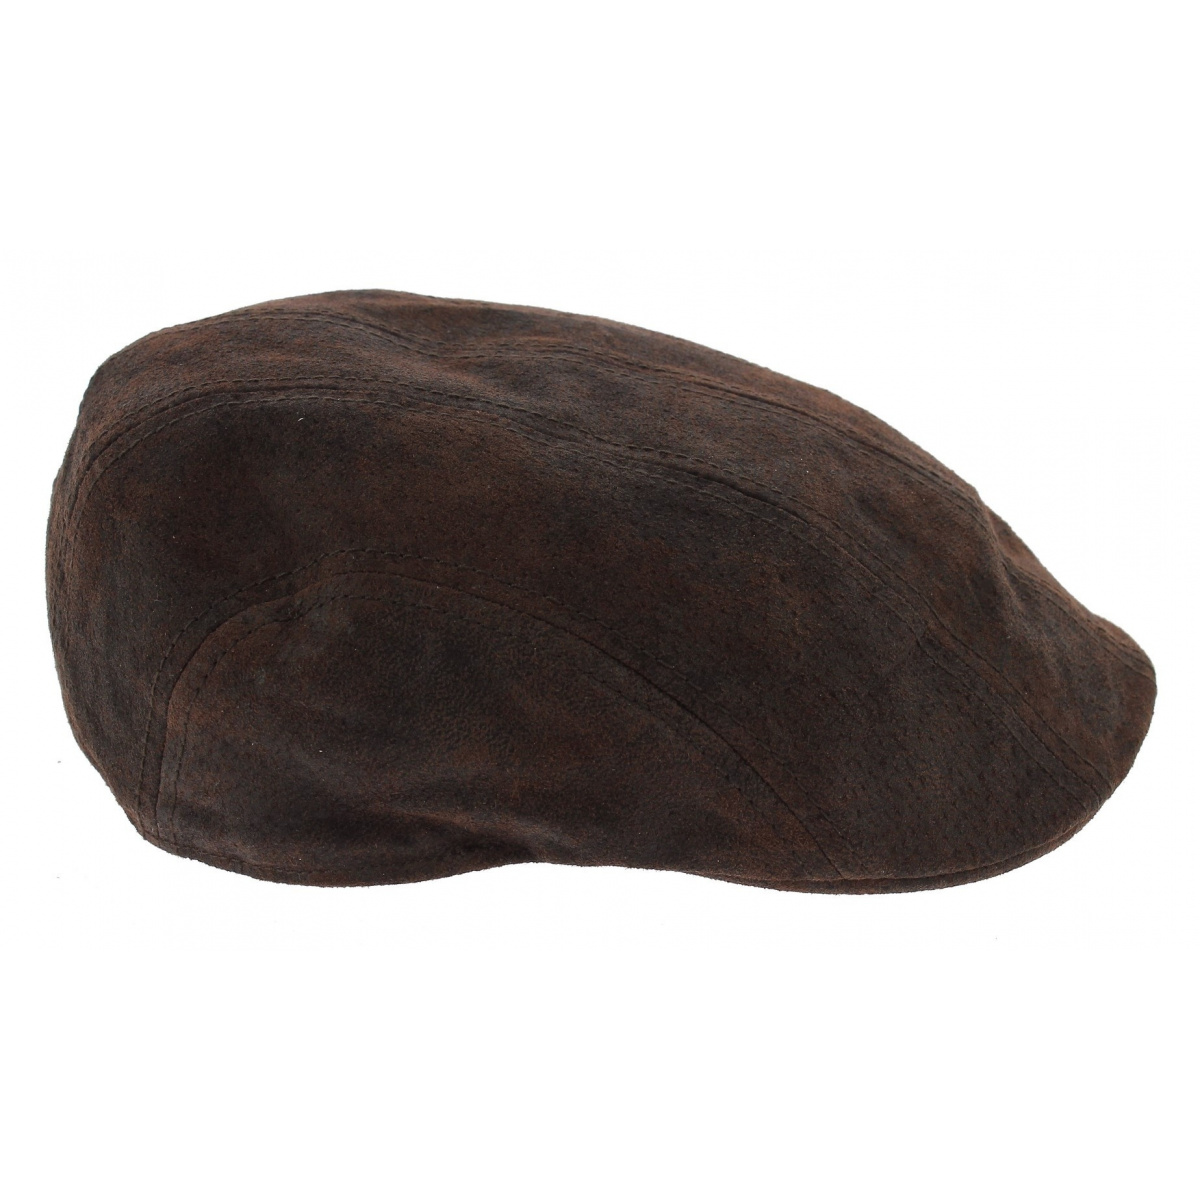 Madison pigskin leather cap - Stetson Reference : 2409 | Chapellerie ...